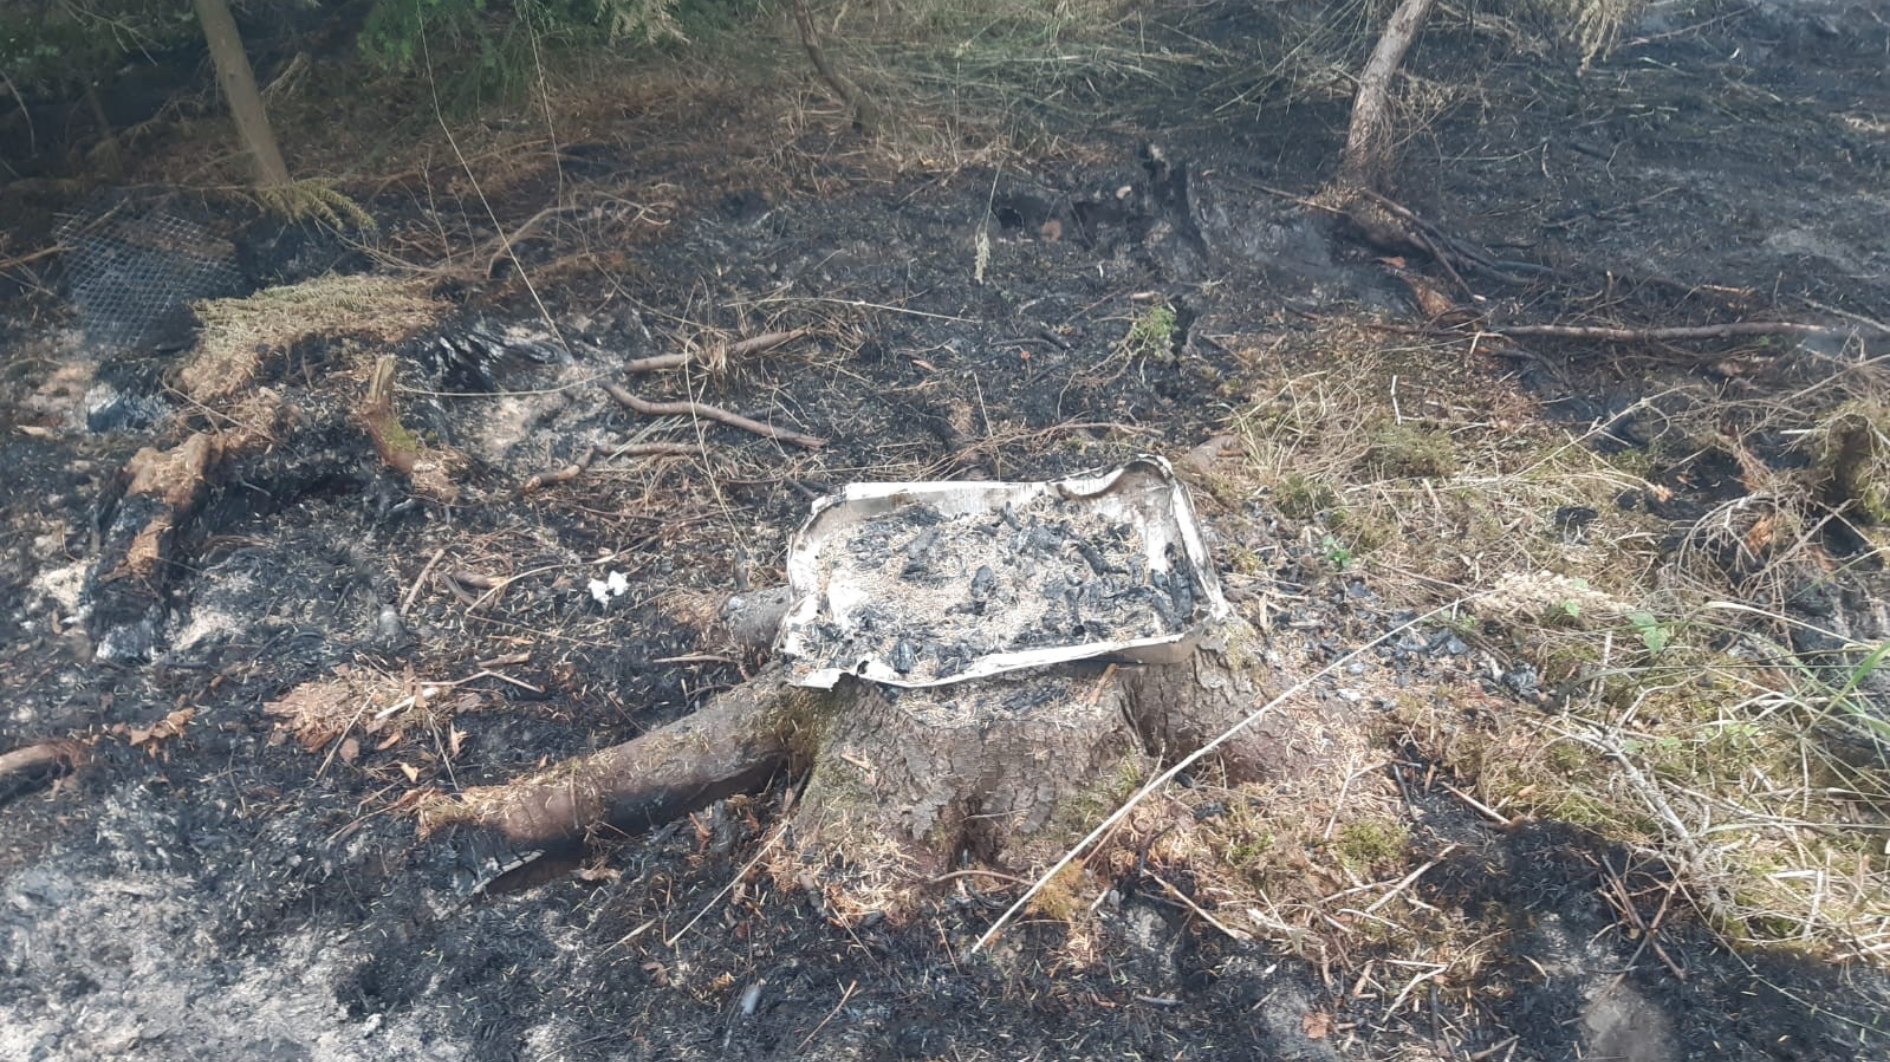 The scene of a fire caused by a disposable BBQ